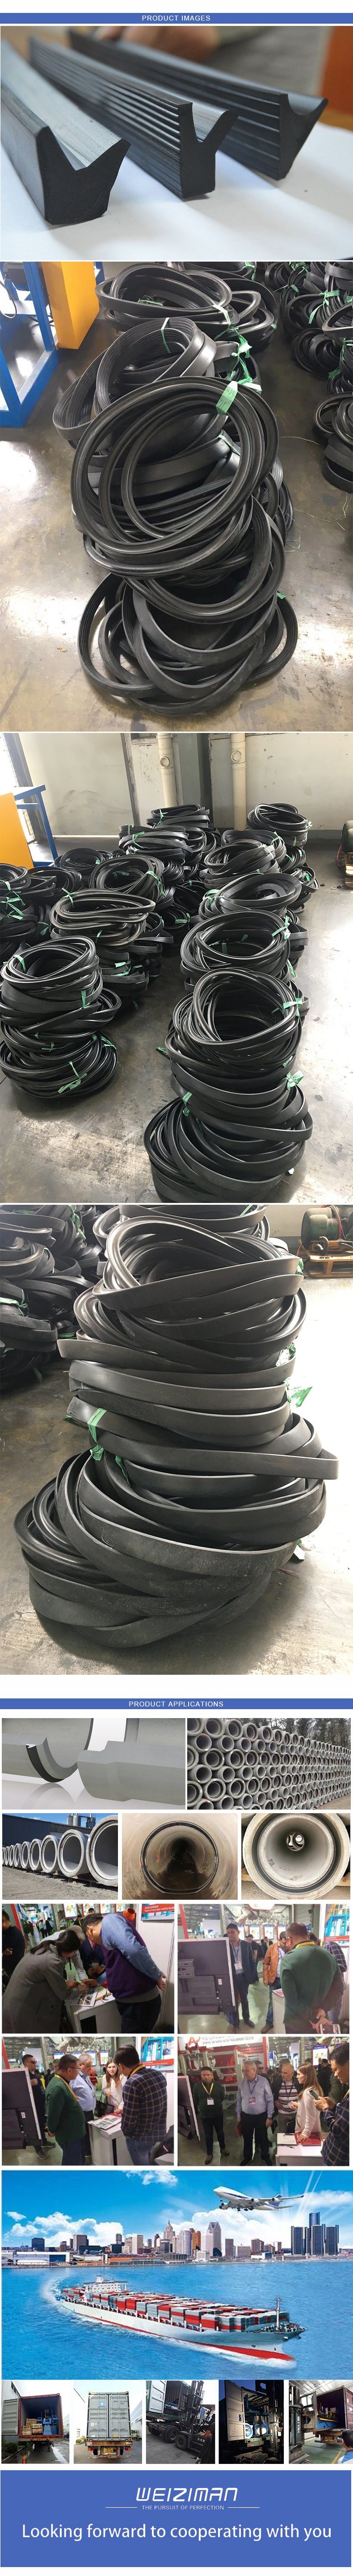 EPDM Rubber Sealing Ring Gasket for Precast Concrete Pipes